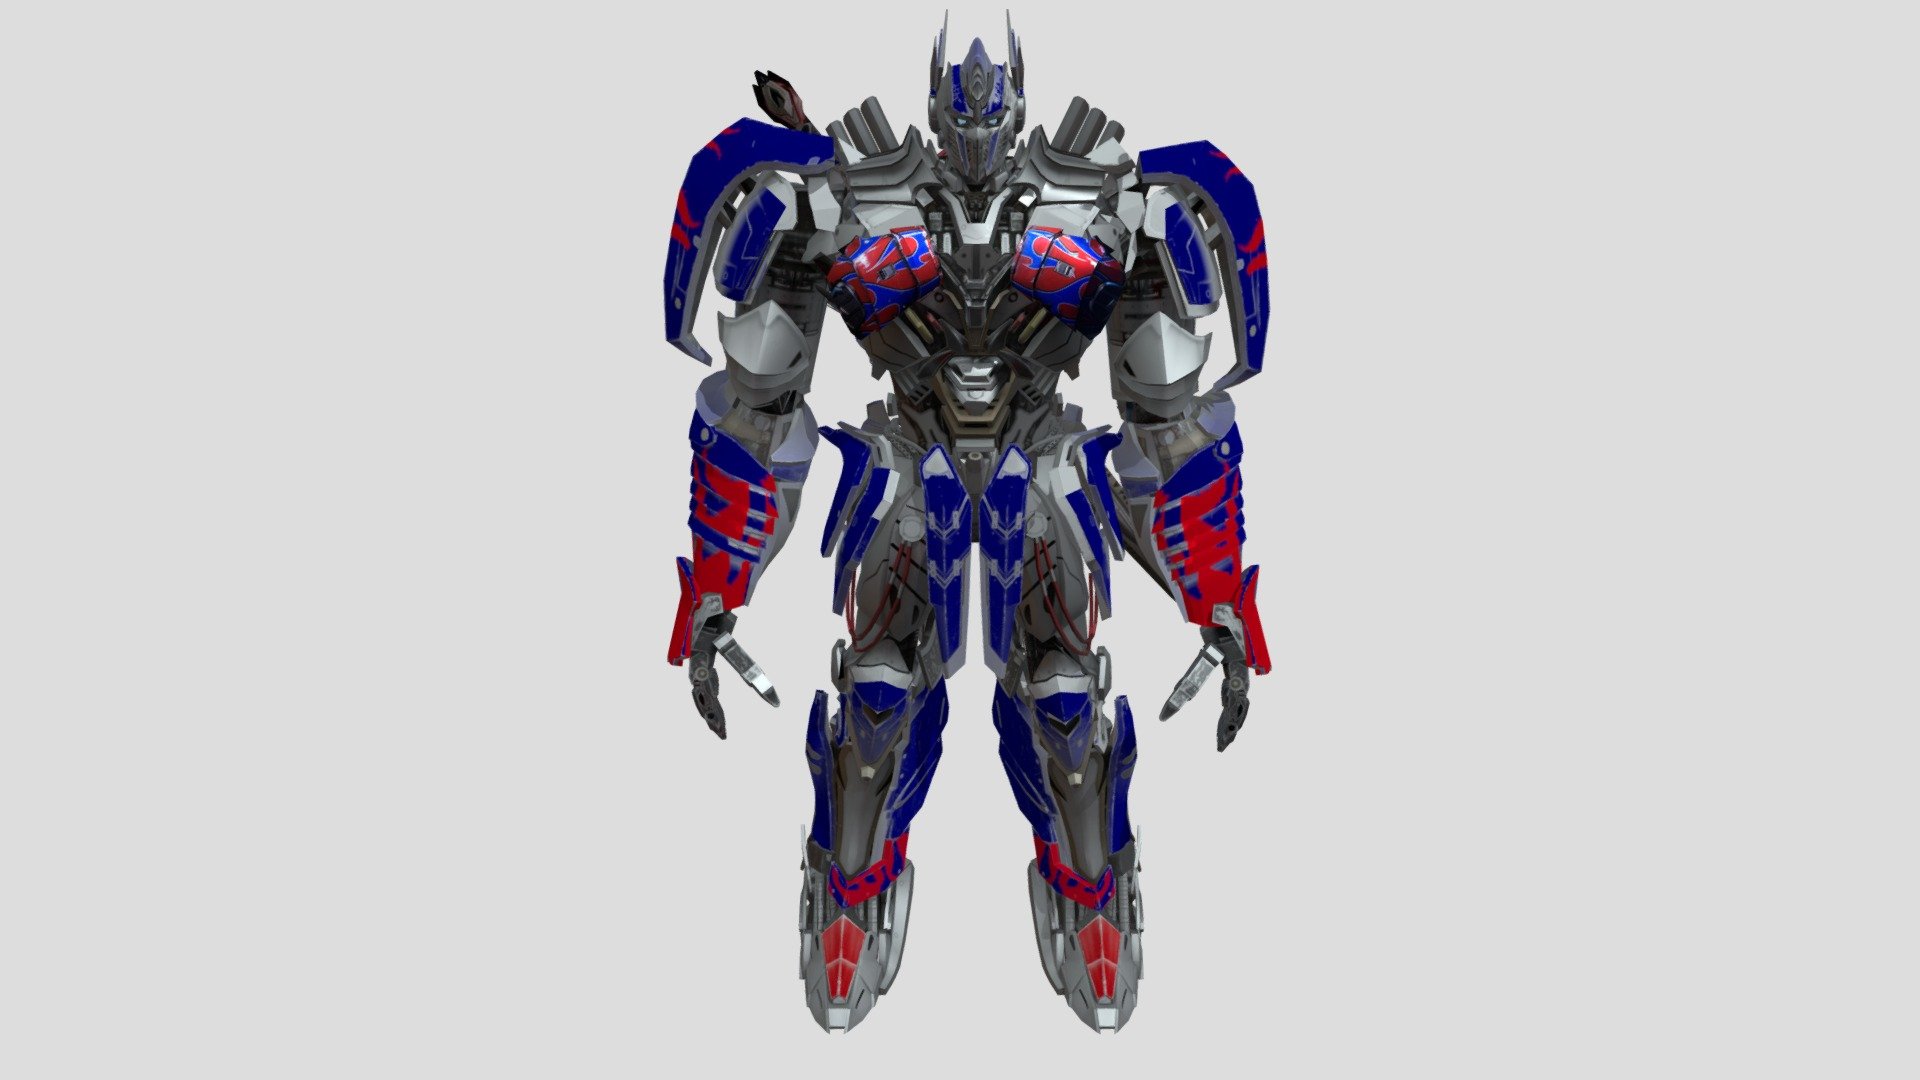 This model IS NOT MODELLED BY ME!! I ONLY TEXTURED IT! Original model by matthewgromov199 - Knight Optimus Prime with improved textures - Download Free 3D model by Blender user Srikanth M (@Ani-sri) 3d model